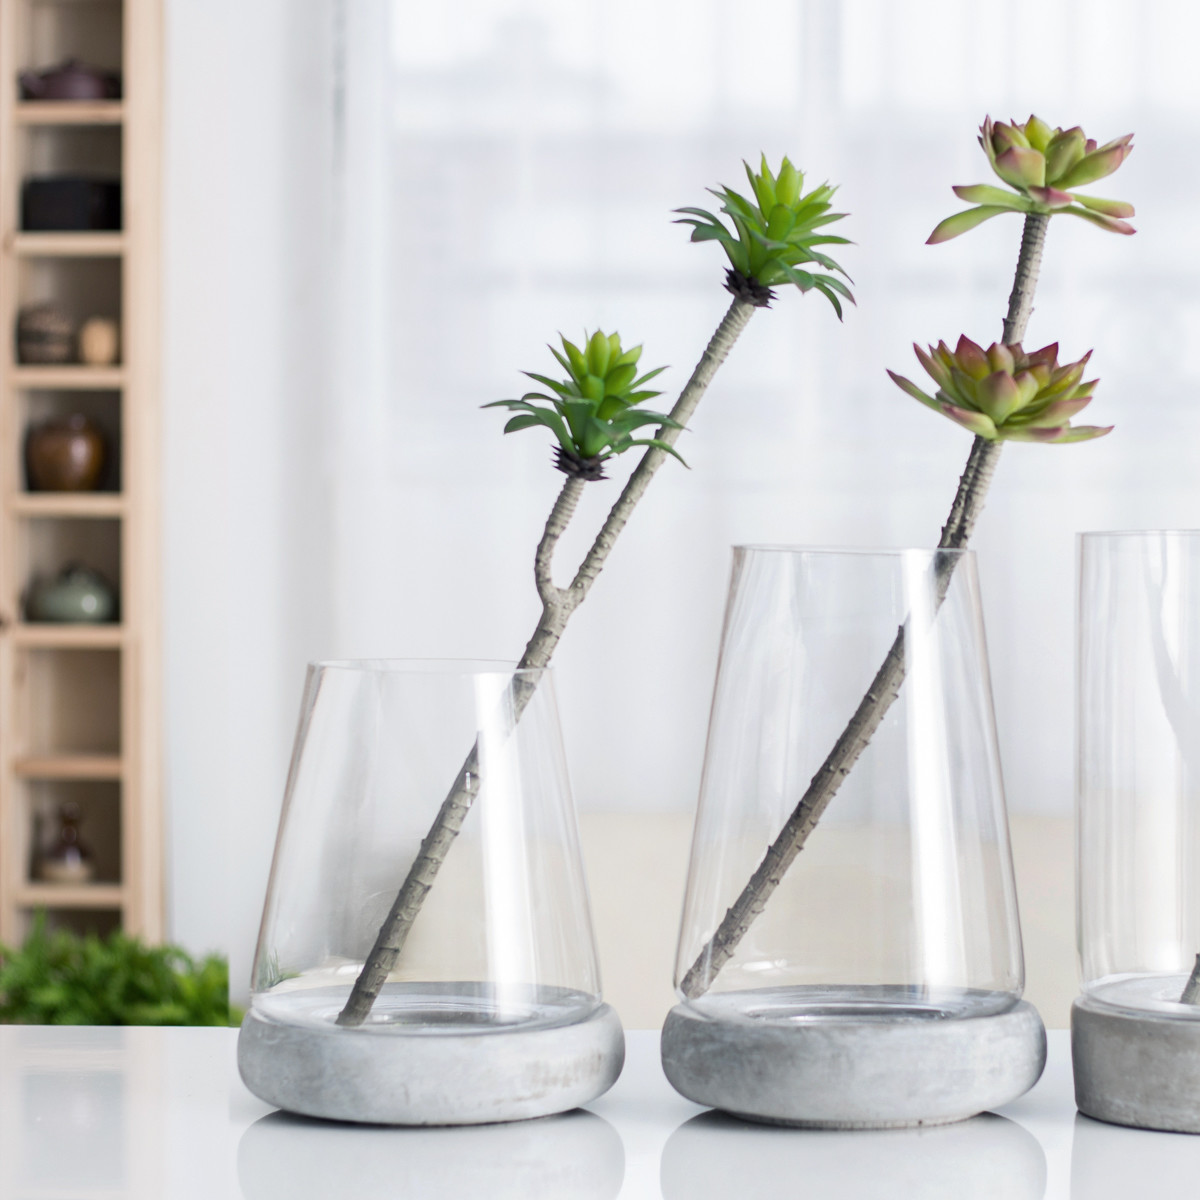 21 Lovable Mini Colored Glass Vases 2024 free download mini colored glass vases of usd 25 42 sicily home cas series nordic minimalist glass vase in sicily home cas series nordic minimalist glass vase cement underpinning home decoration flower ar